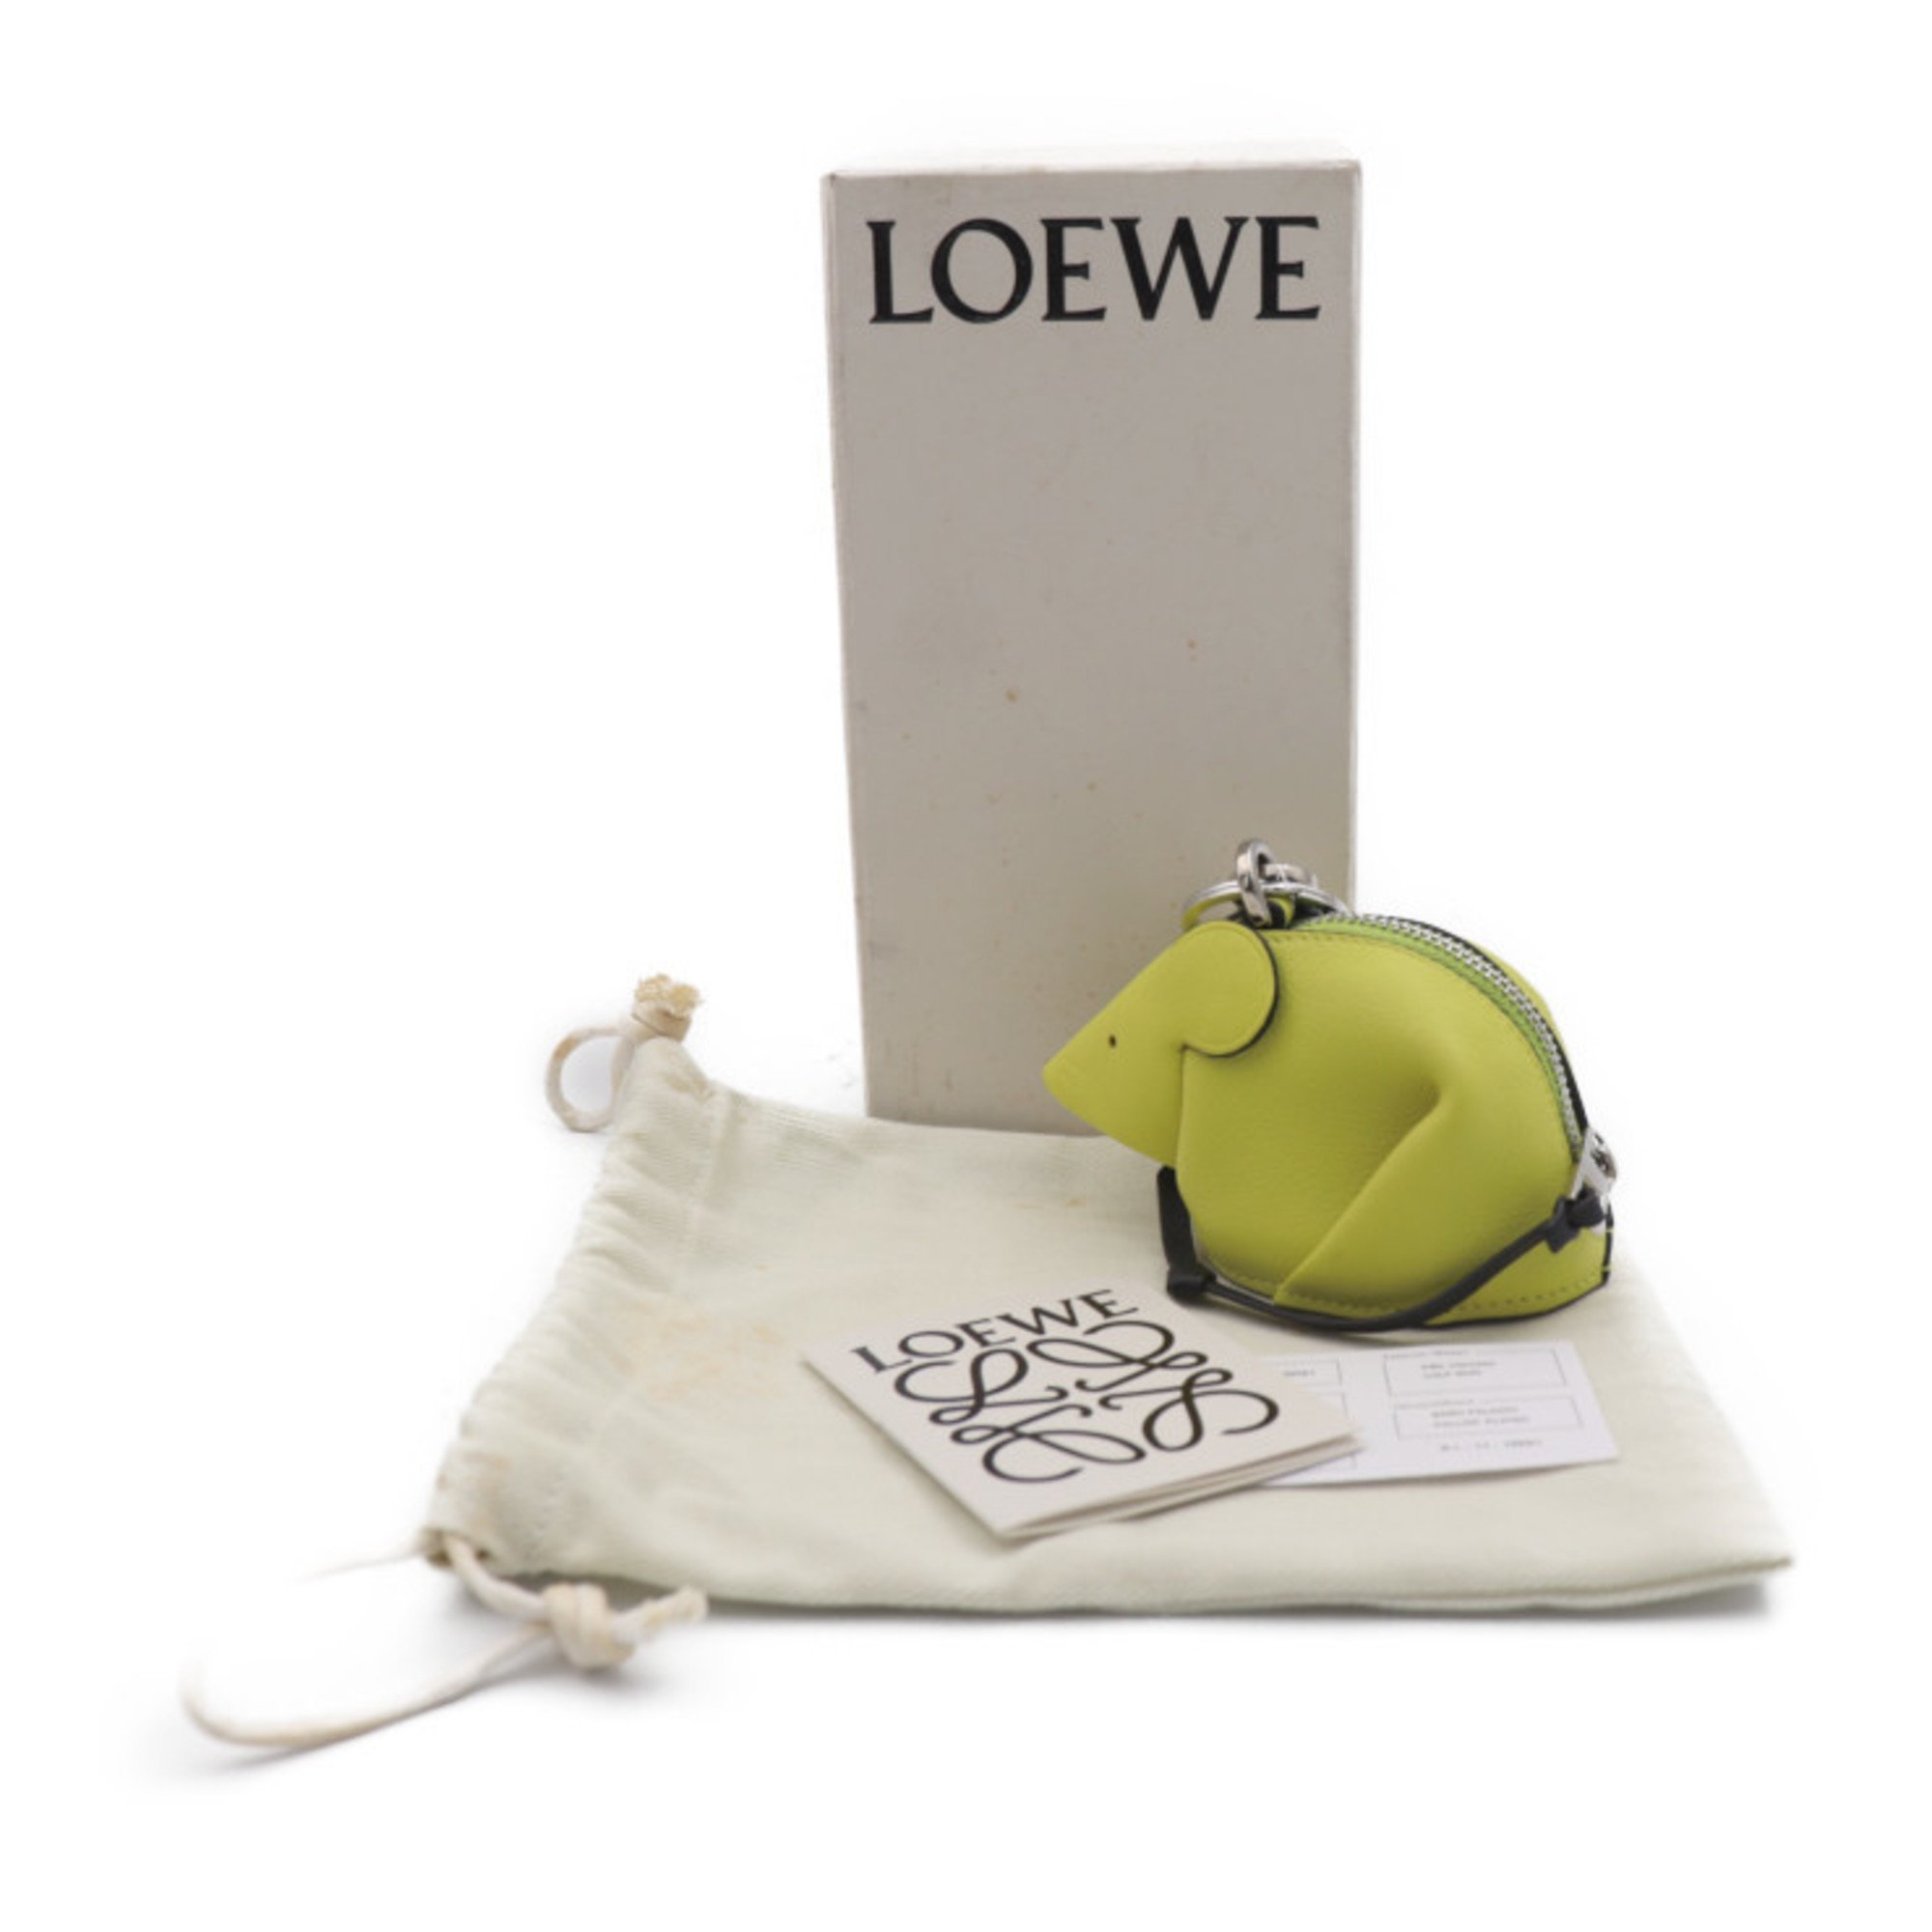 LOEWE Bag Charm Wallet/Coin Case 199.30BR81 Calf Leather Lime Coin Purse Mouse Key Holder Ring